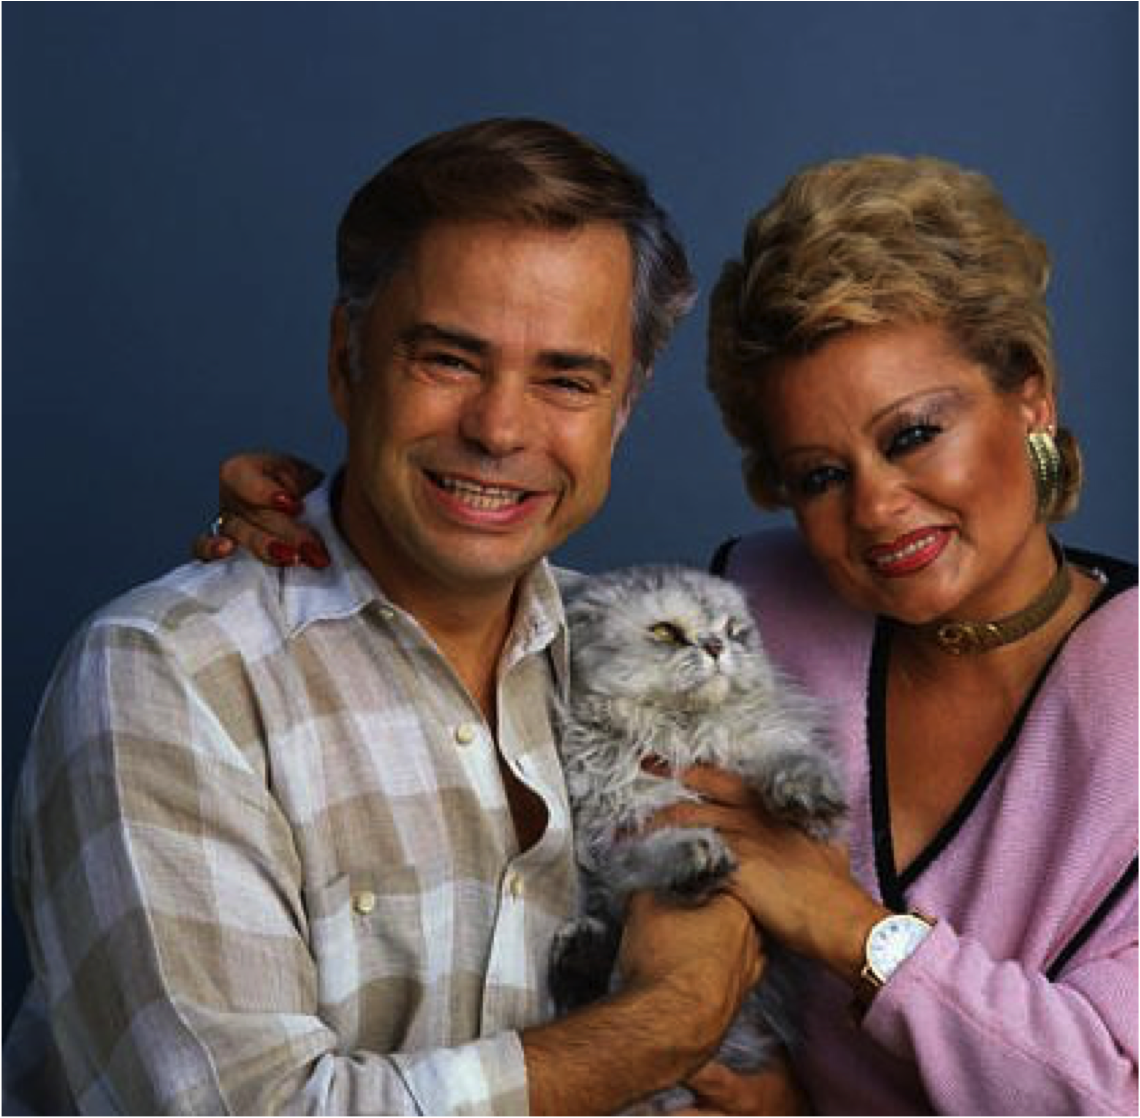 Smiling man and woman holding a gray, long-haired cat between them